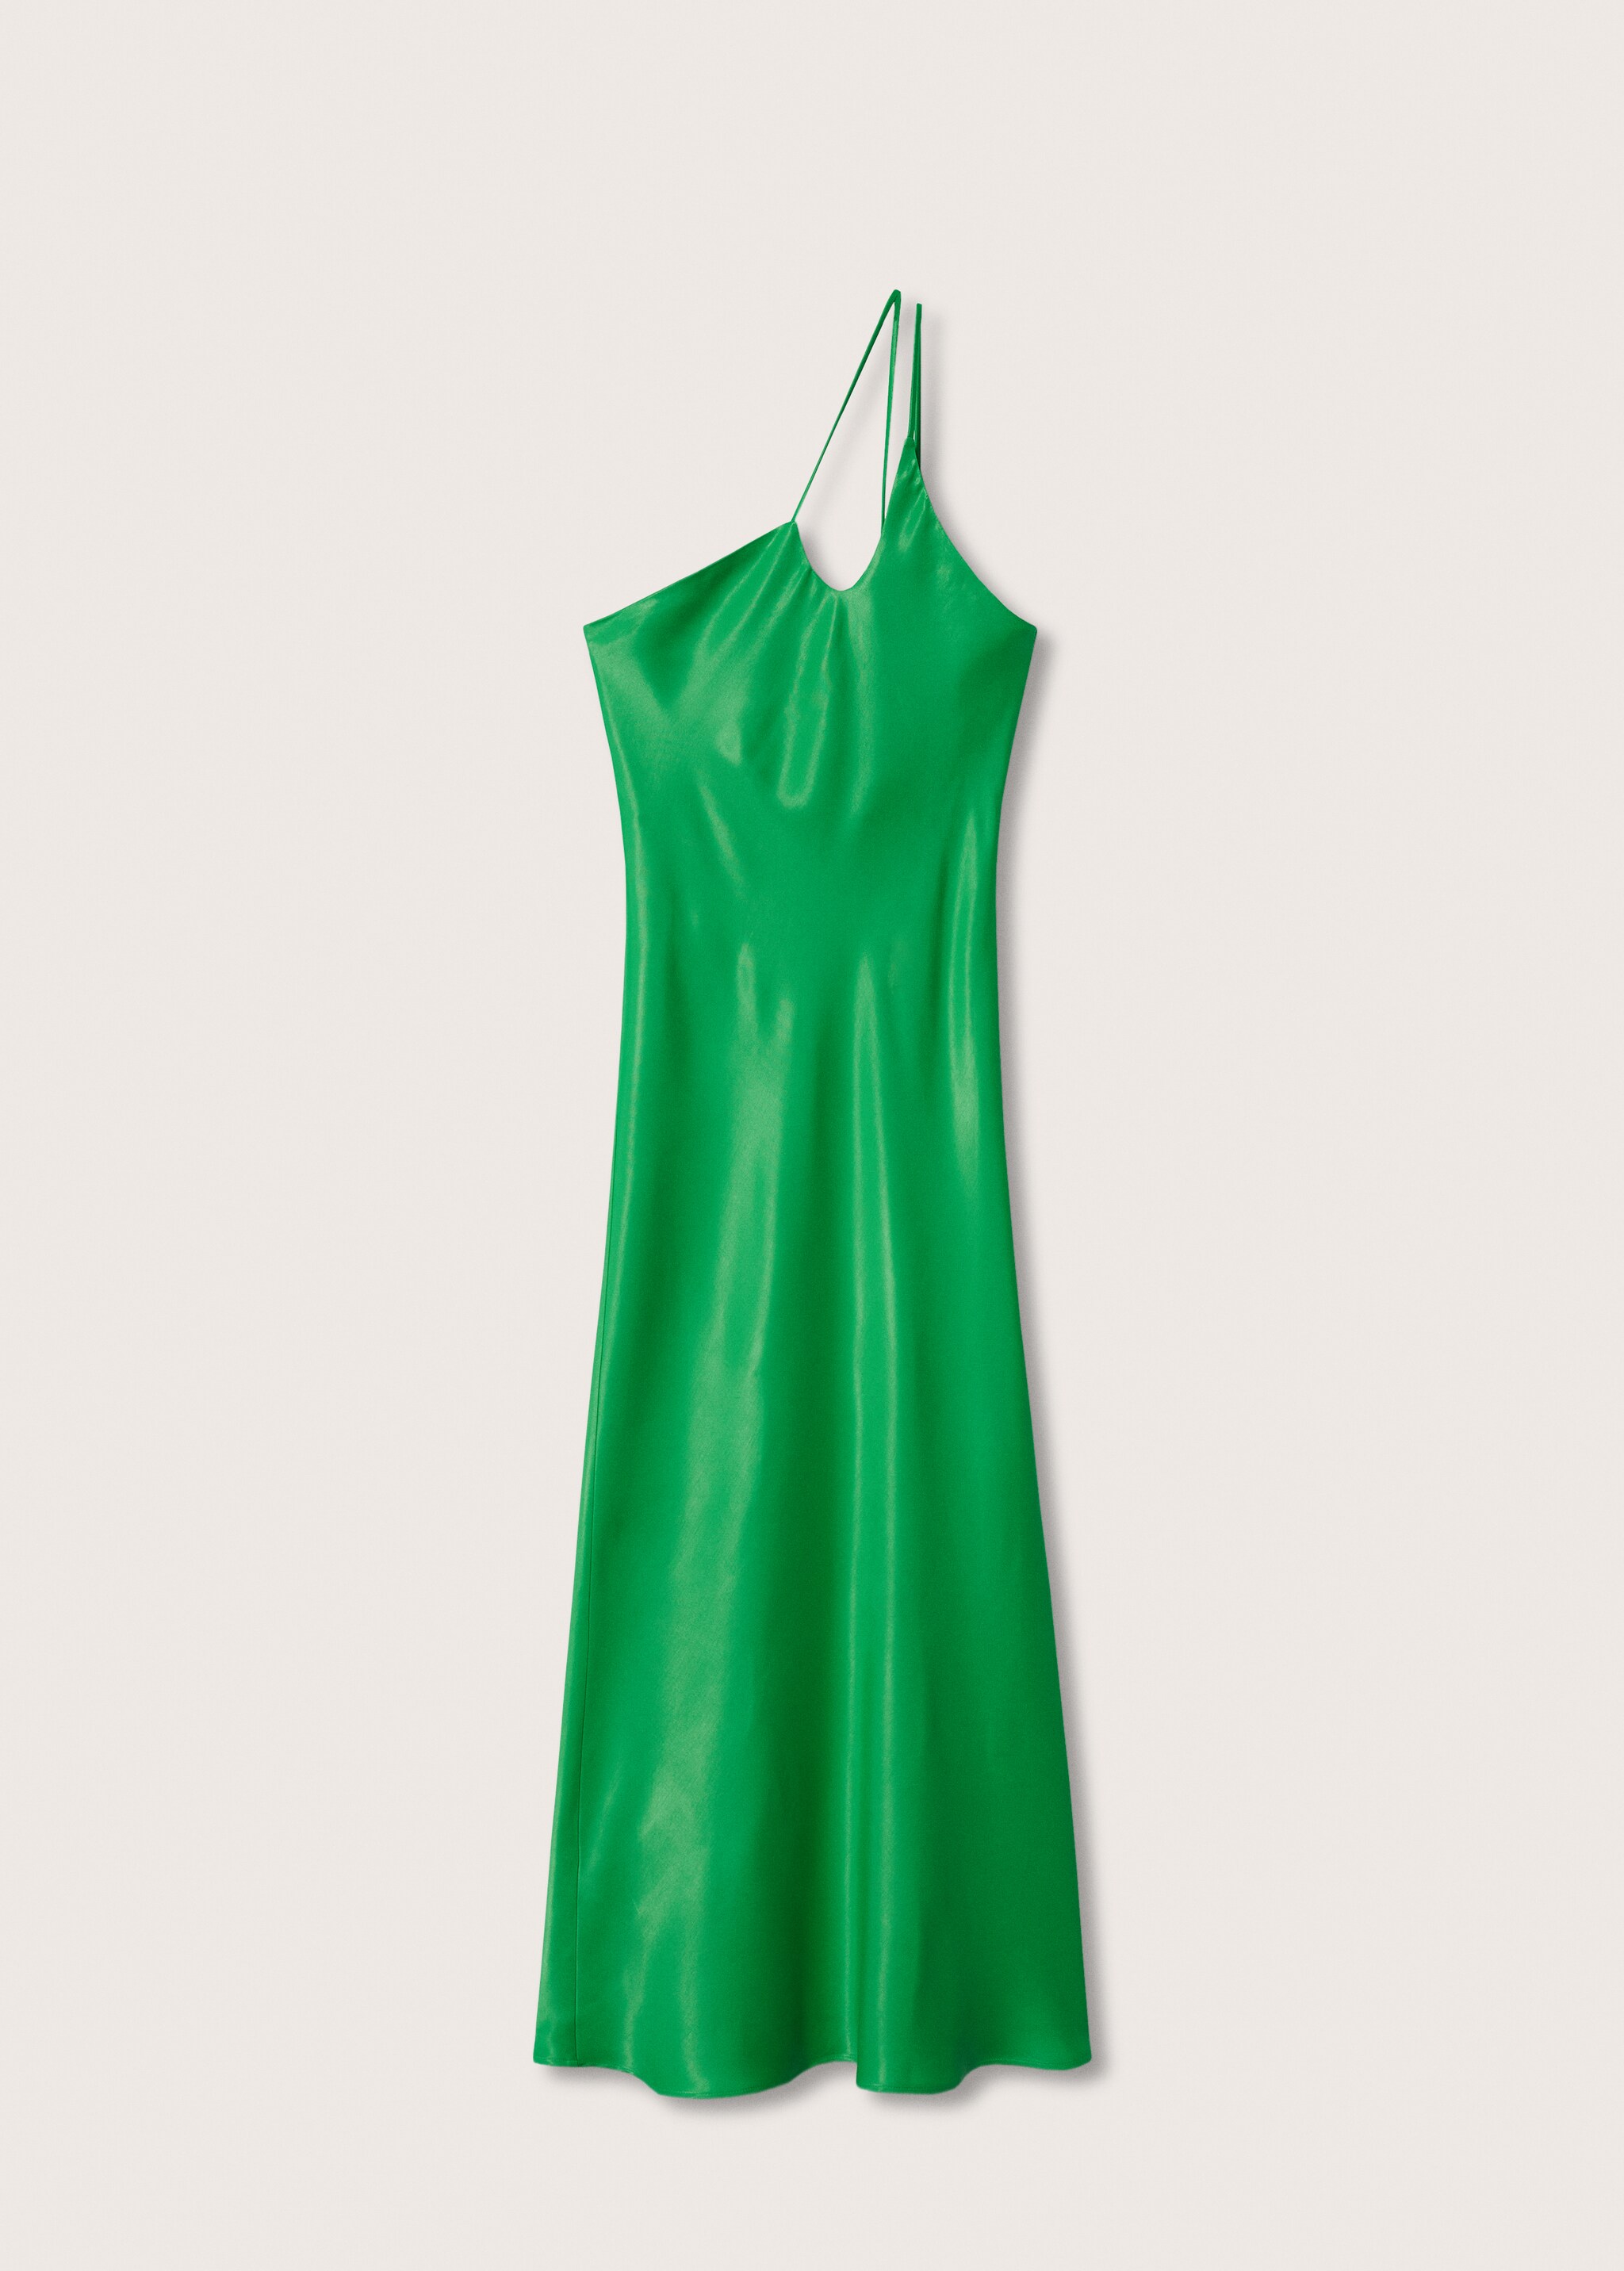 Asymmetrical satin dress - Article without model